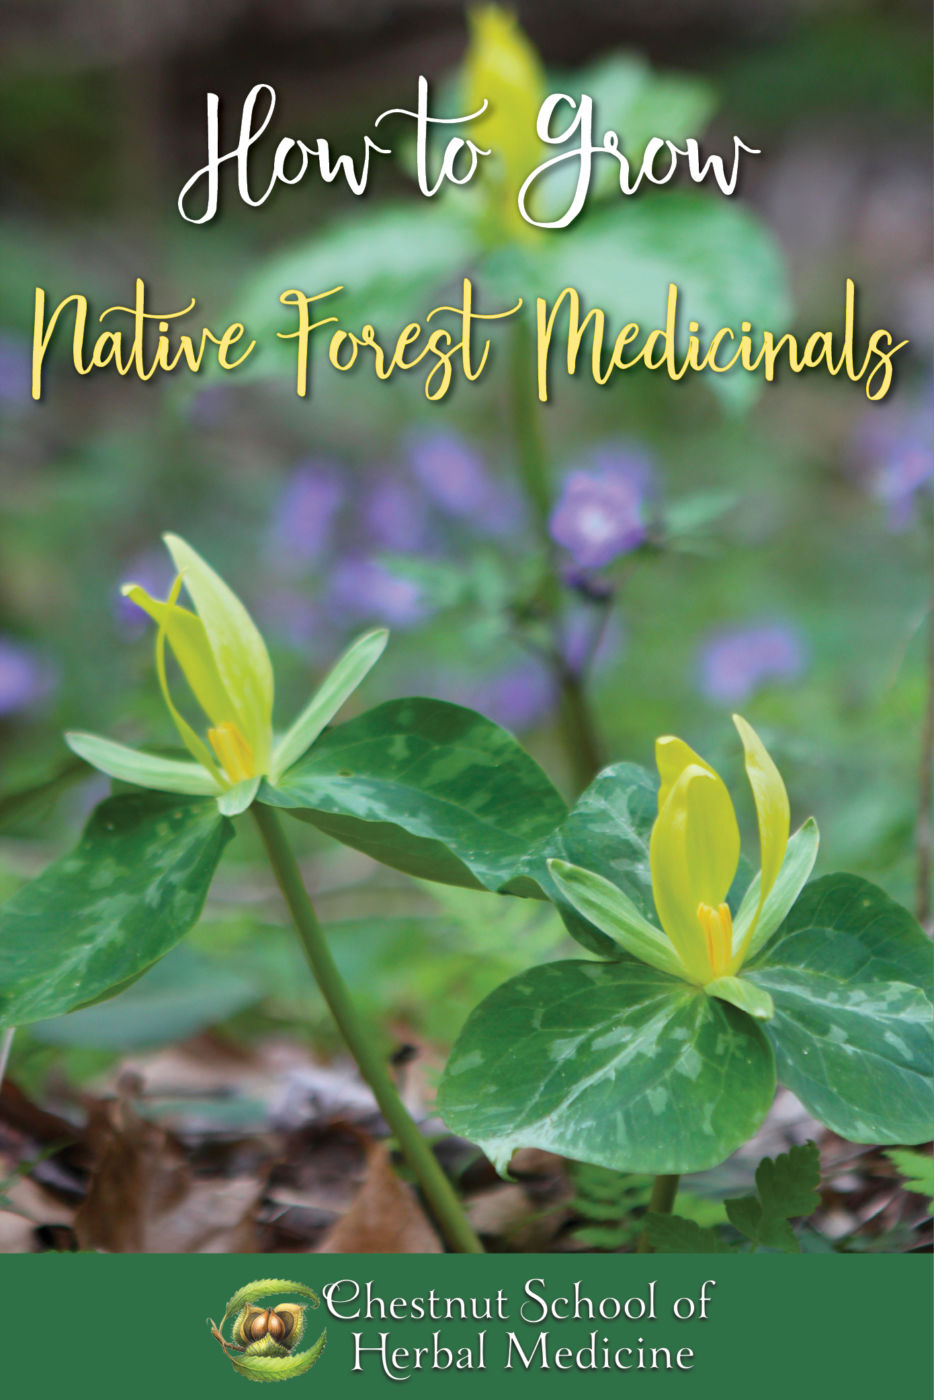 How to Grow Native Forest Medicinals.